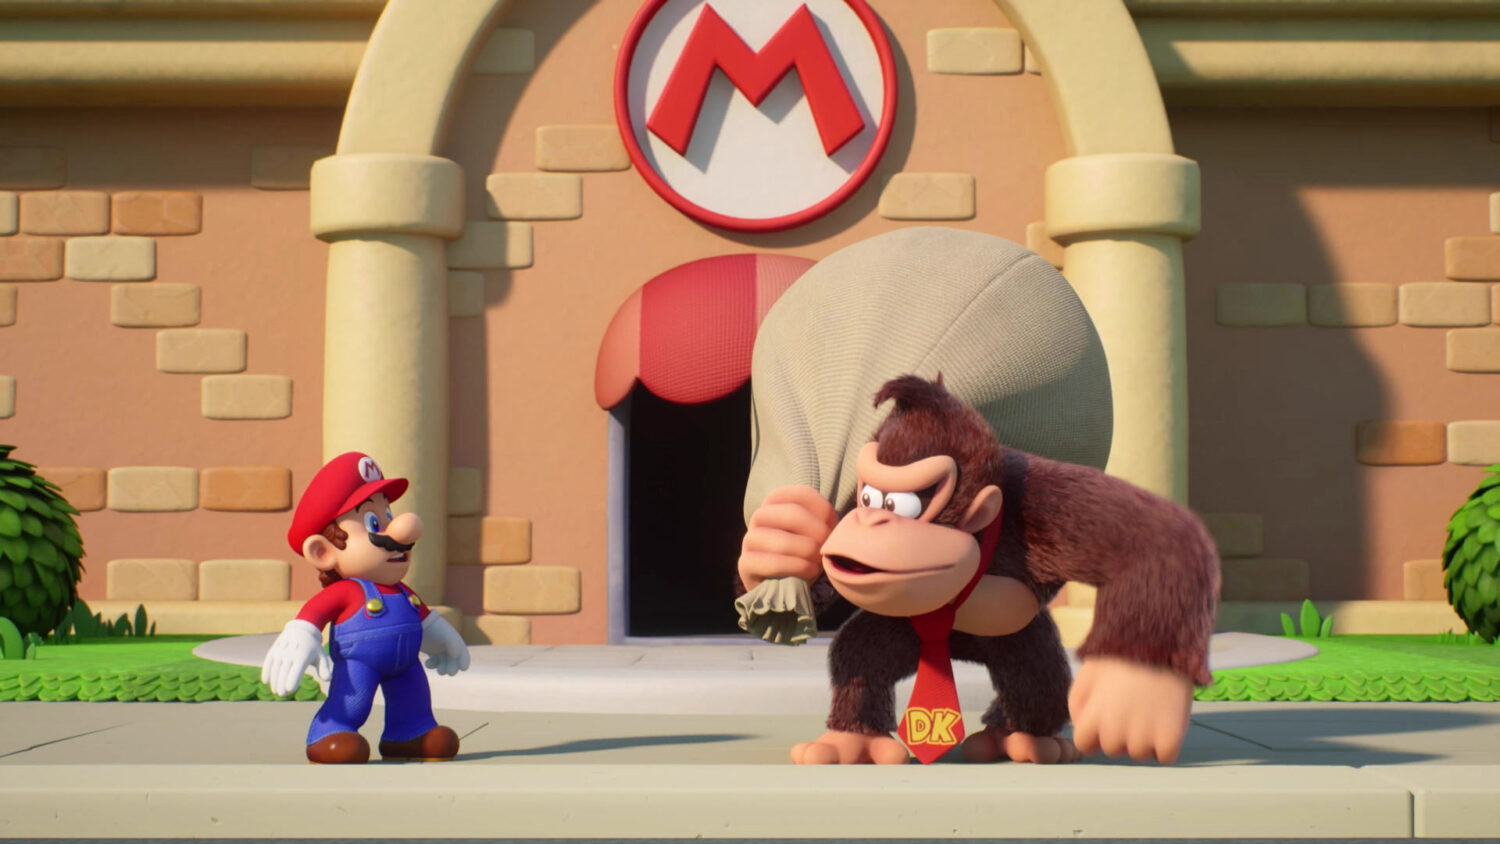 Mario Vs. Donkey Kong demo is out now - Nintendo Switch